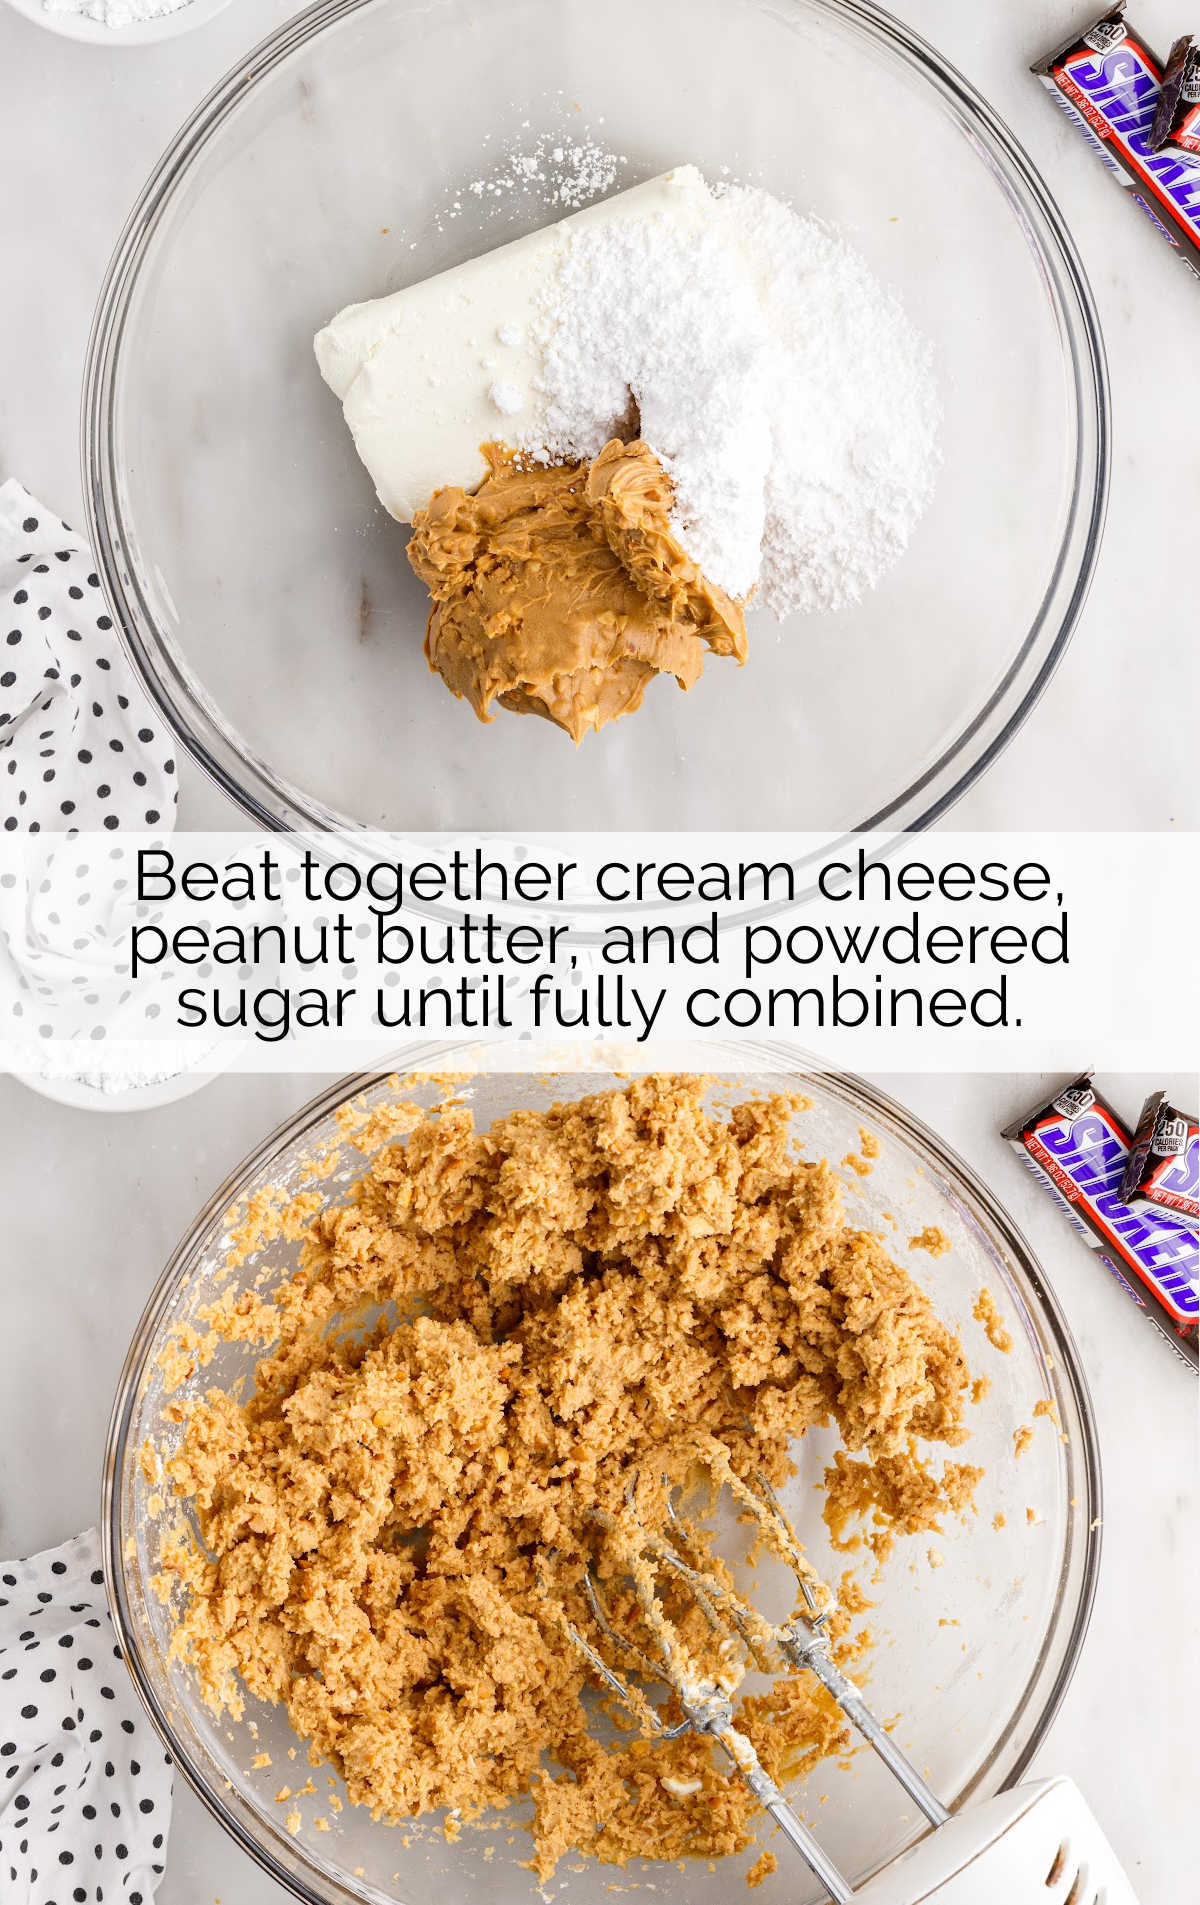 cream cheese, peanut butter, and powdered sugar blended together in a bowl